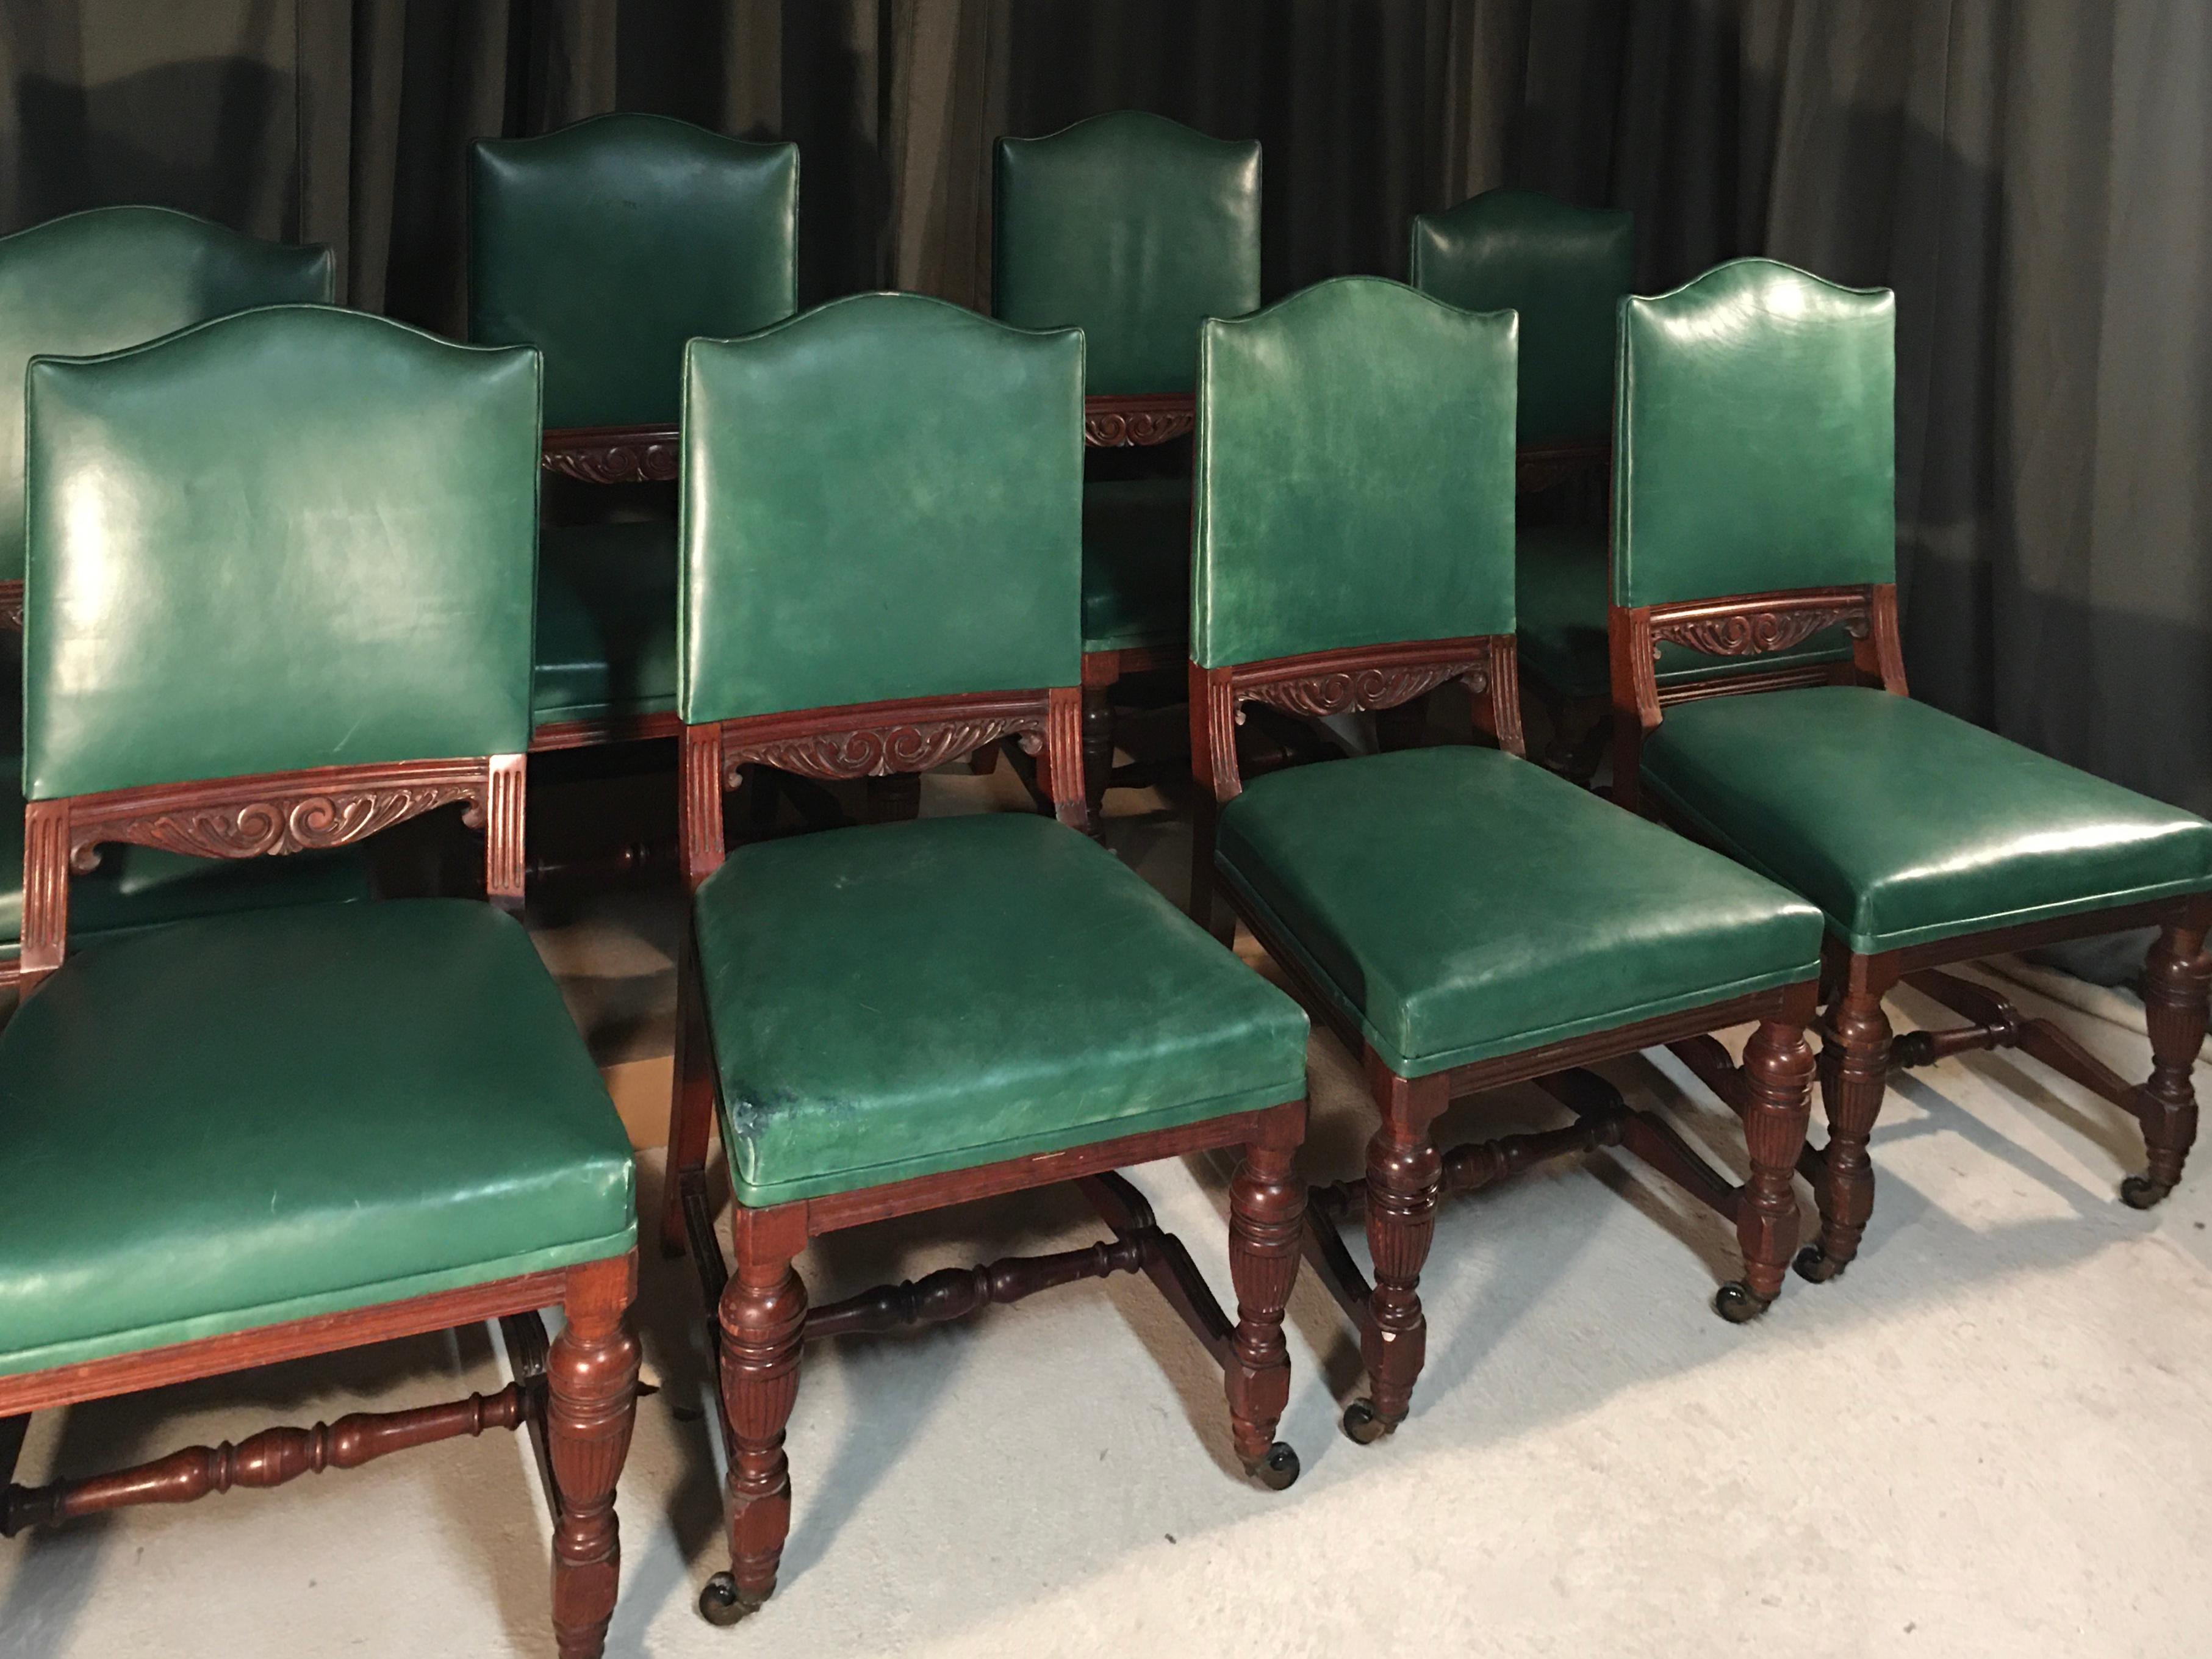 Series of 8 English Chairs in Green Leather, Mahogany, Early 20th Century For Sale 1